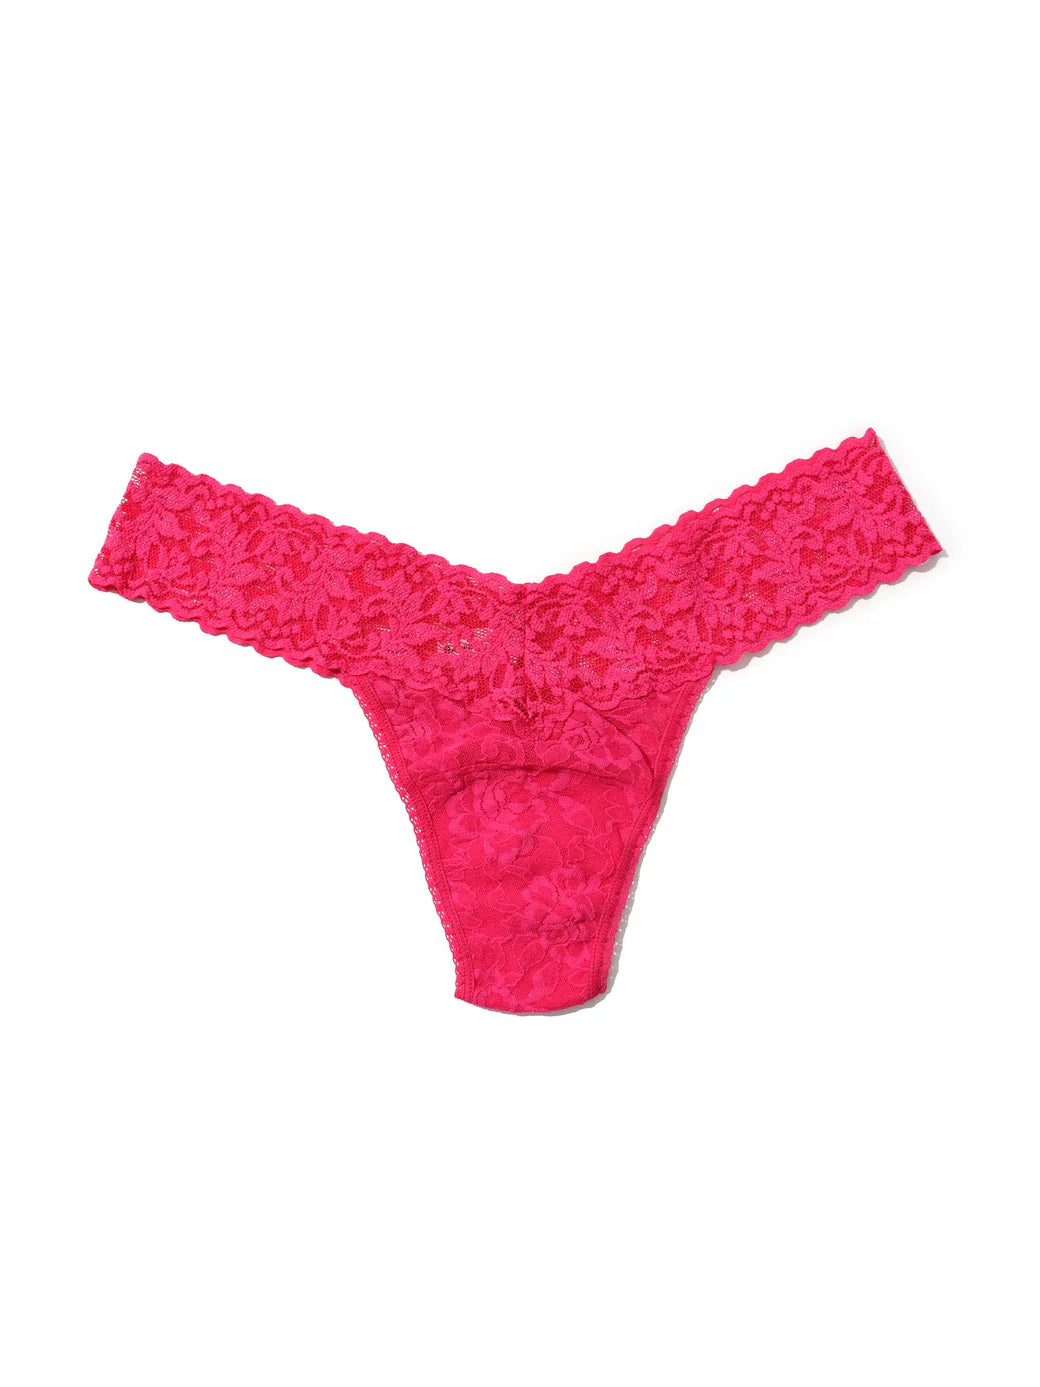 Buy morning-glory Hanky Panky Signature Lace Original Rise Thong-Packaged 4811p